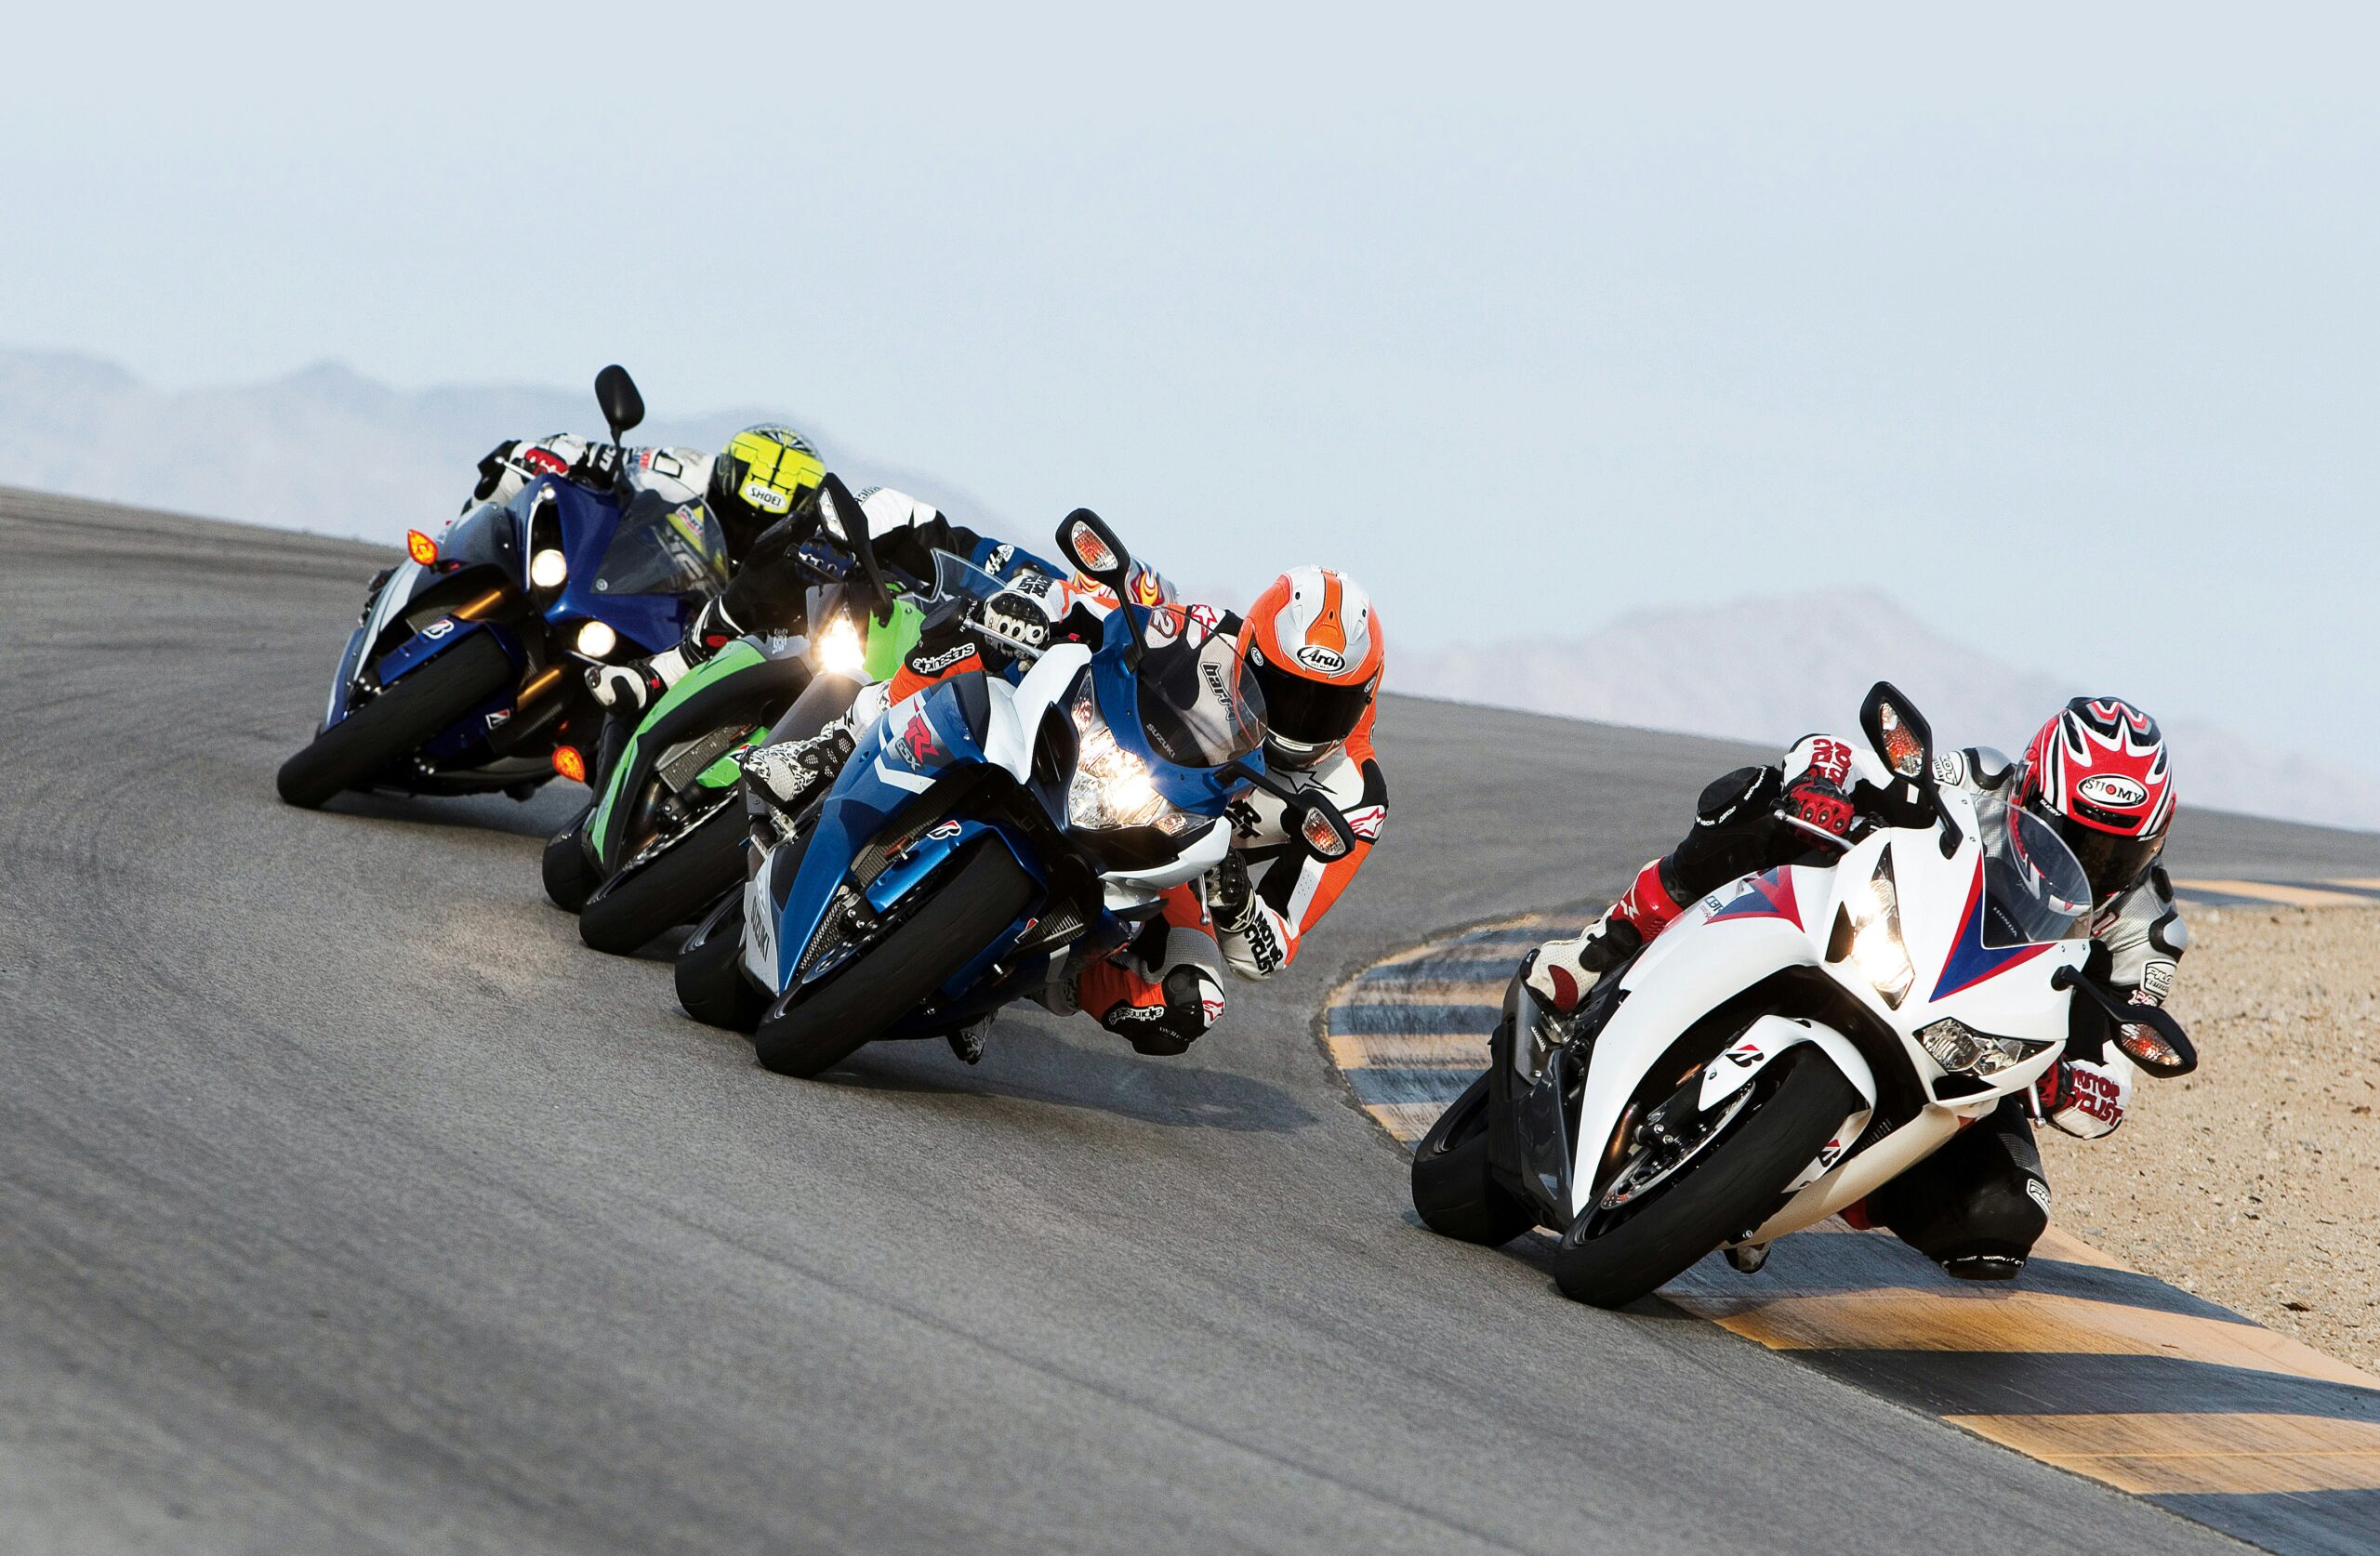 group of people riding sports motorcycles